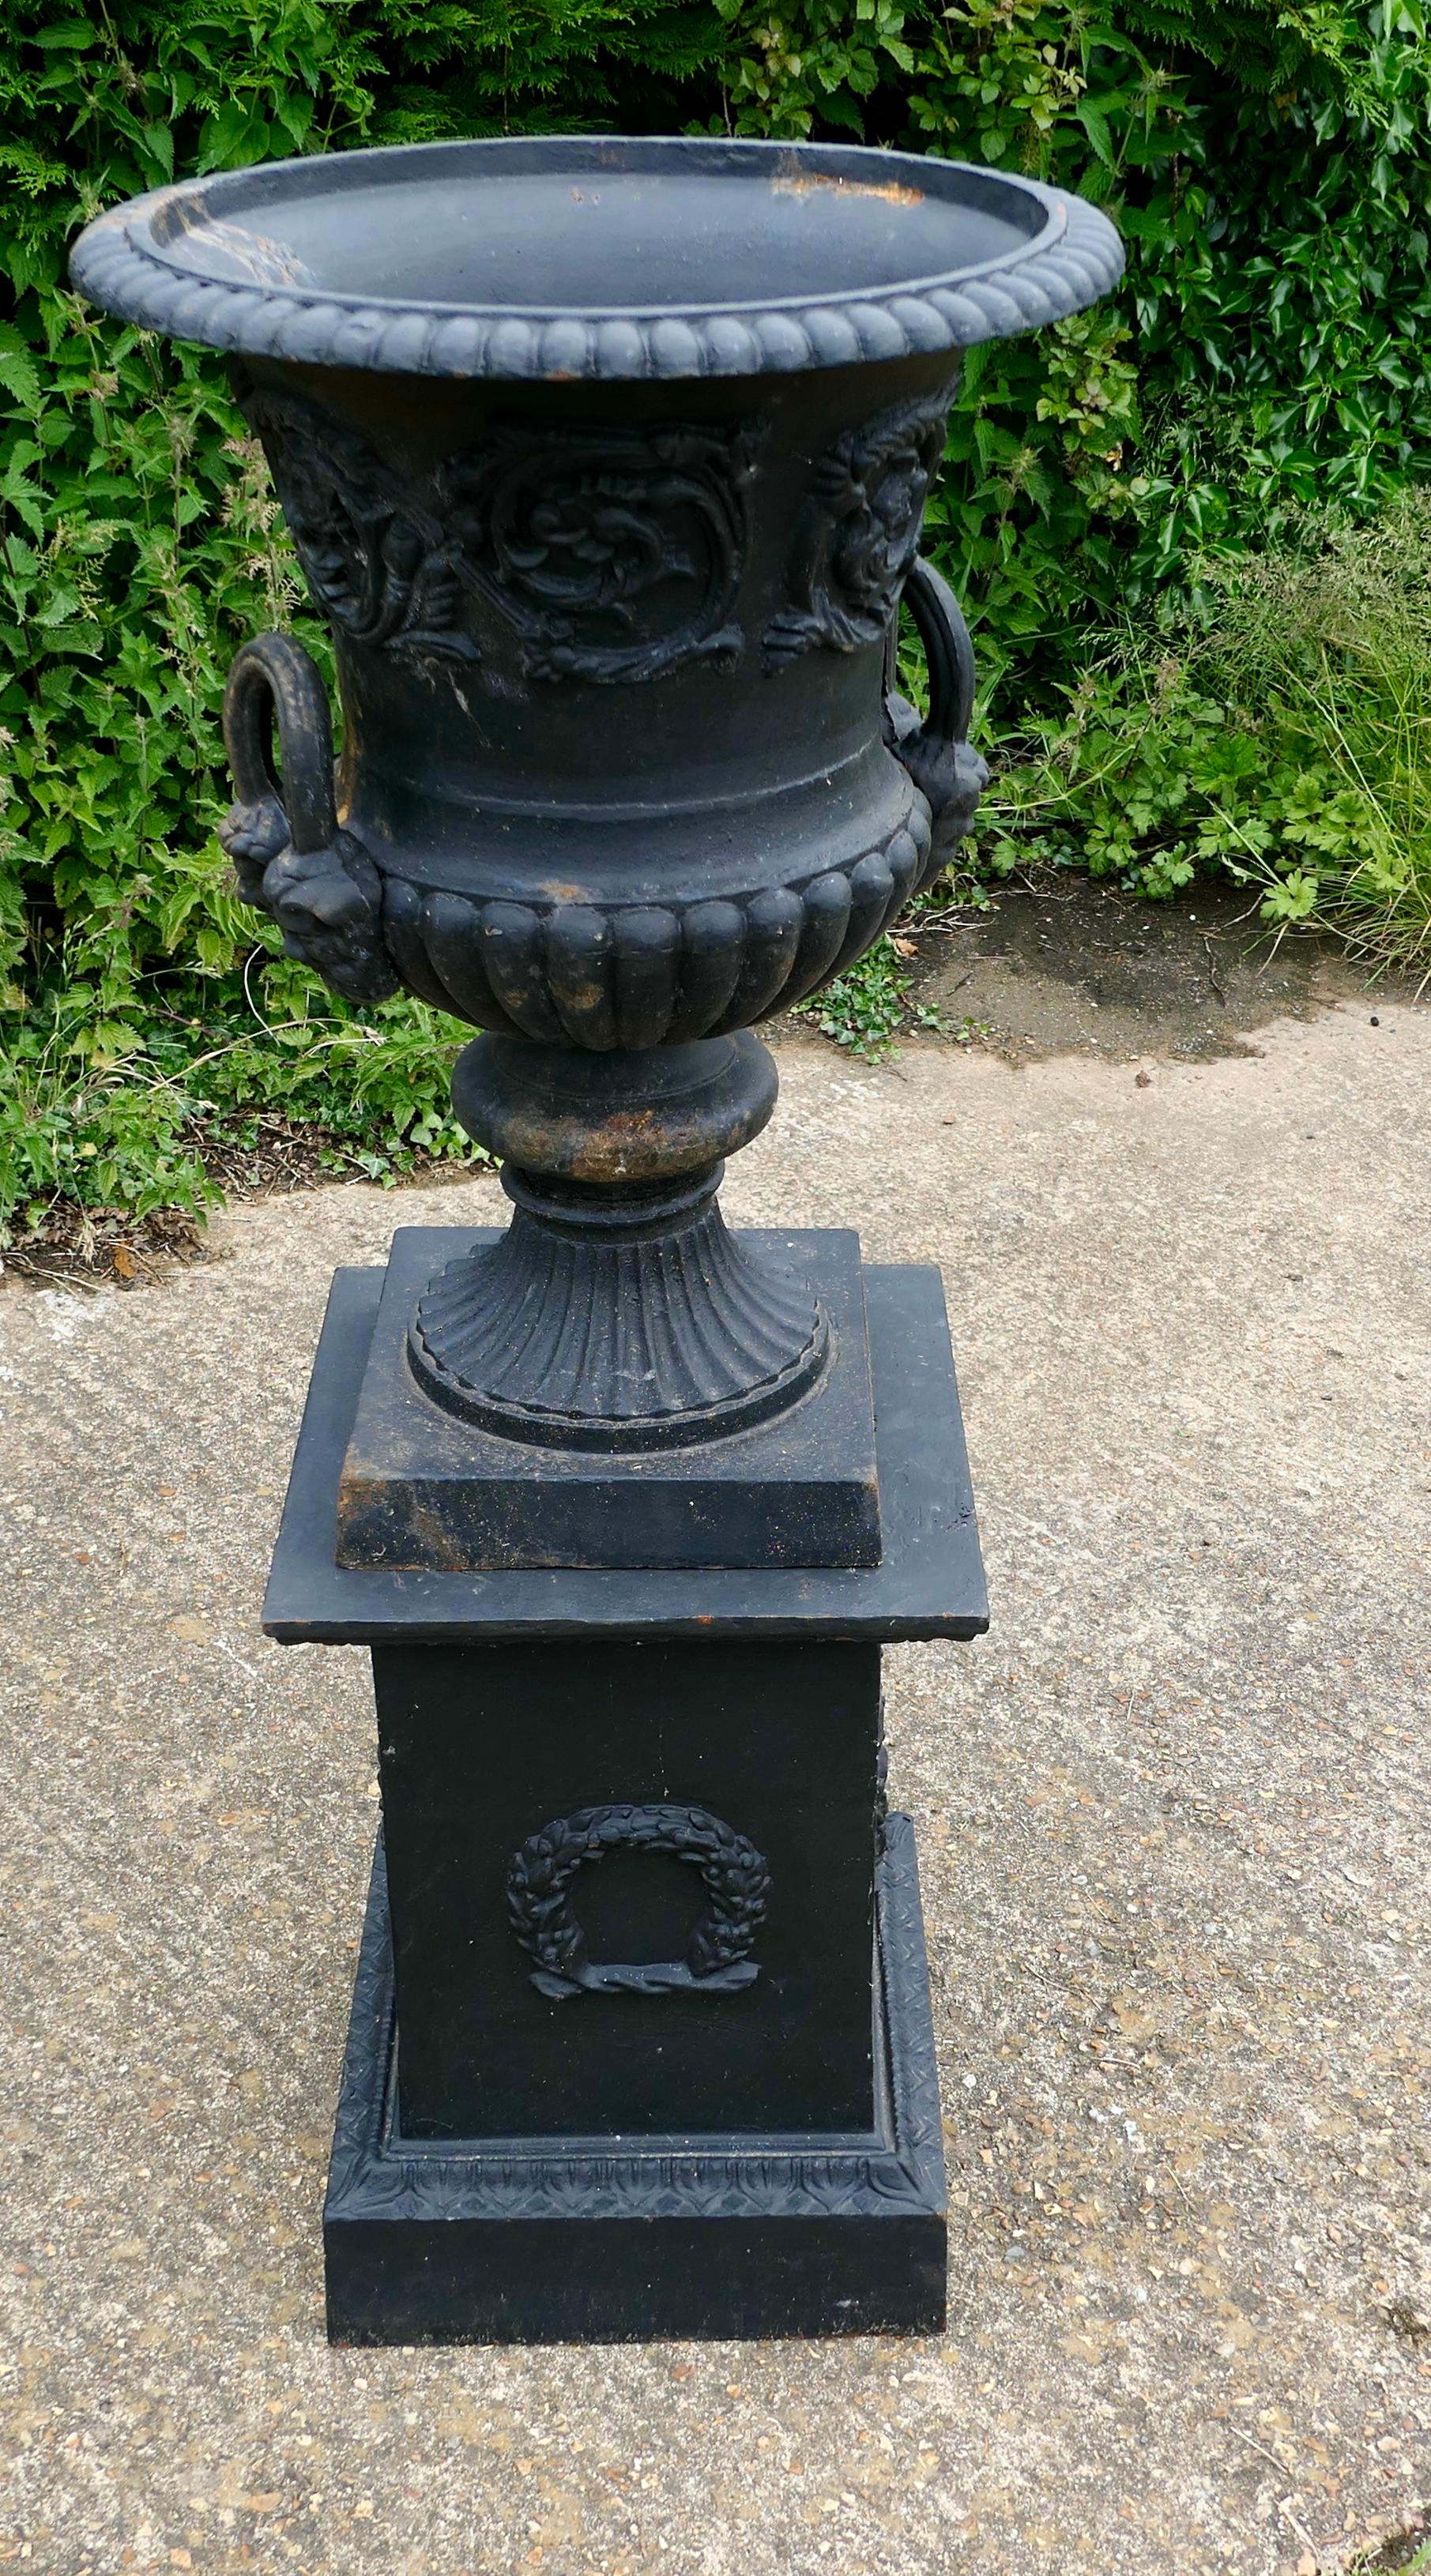 Large cast iron urn, garden planter

This is a superb large garden urn on a plinth, the urn is in cast iron with a classical flower pattern and it has lions mask handles.
The plinth is decorated with laurel wreath on every side.
The urn and